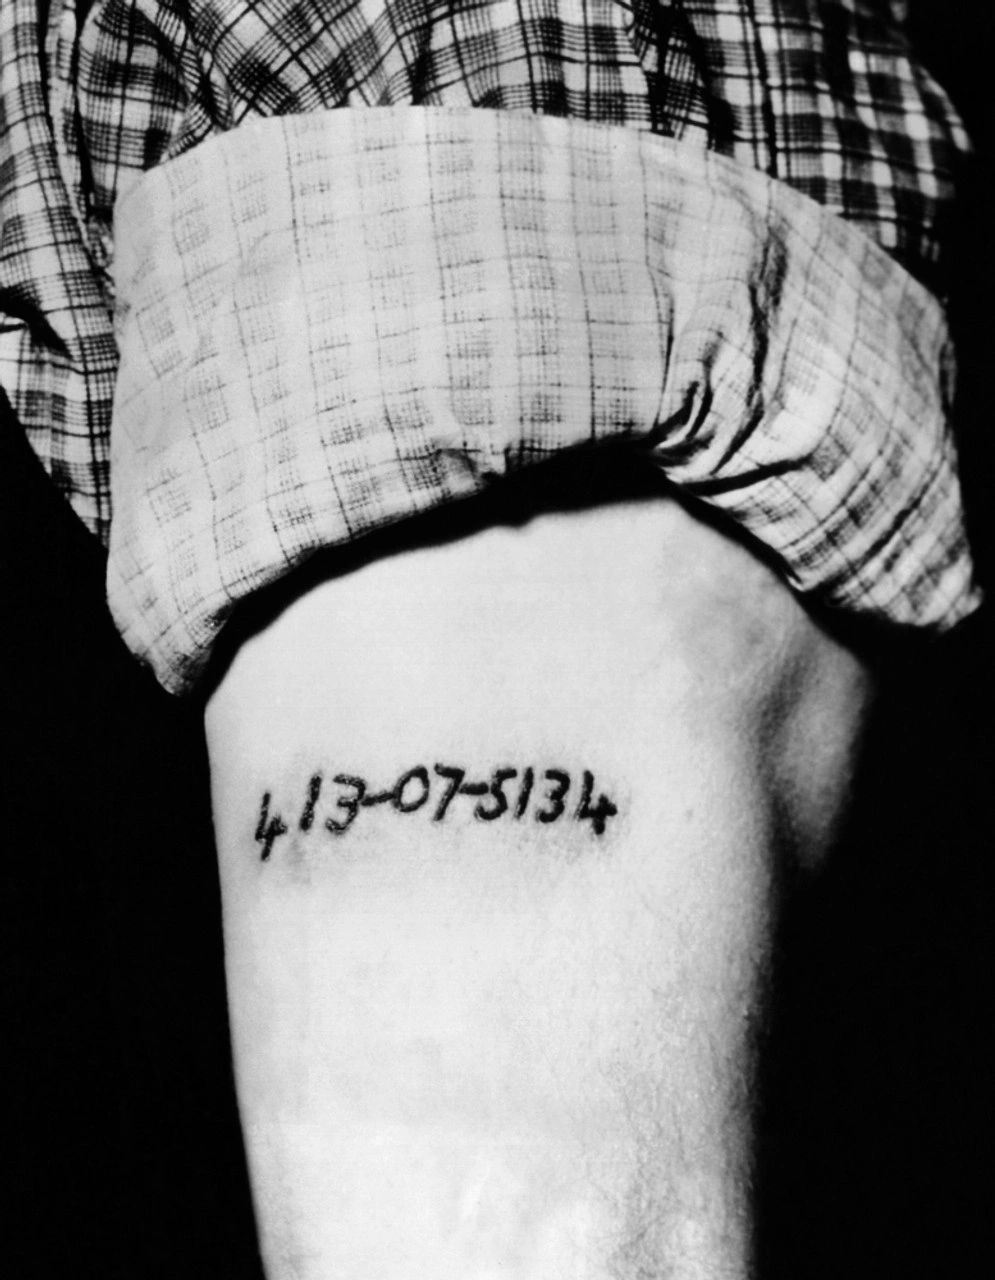 social security number tattoo